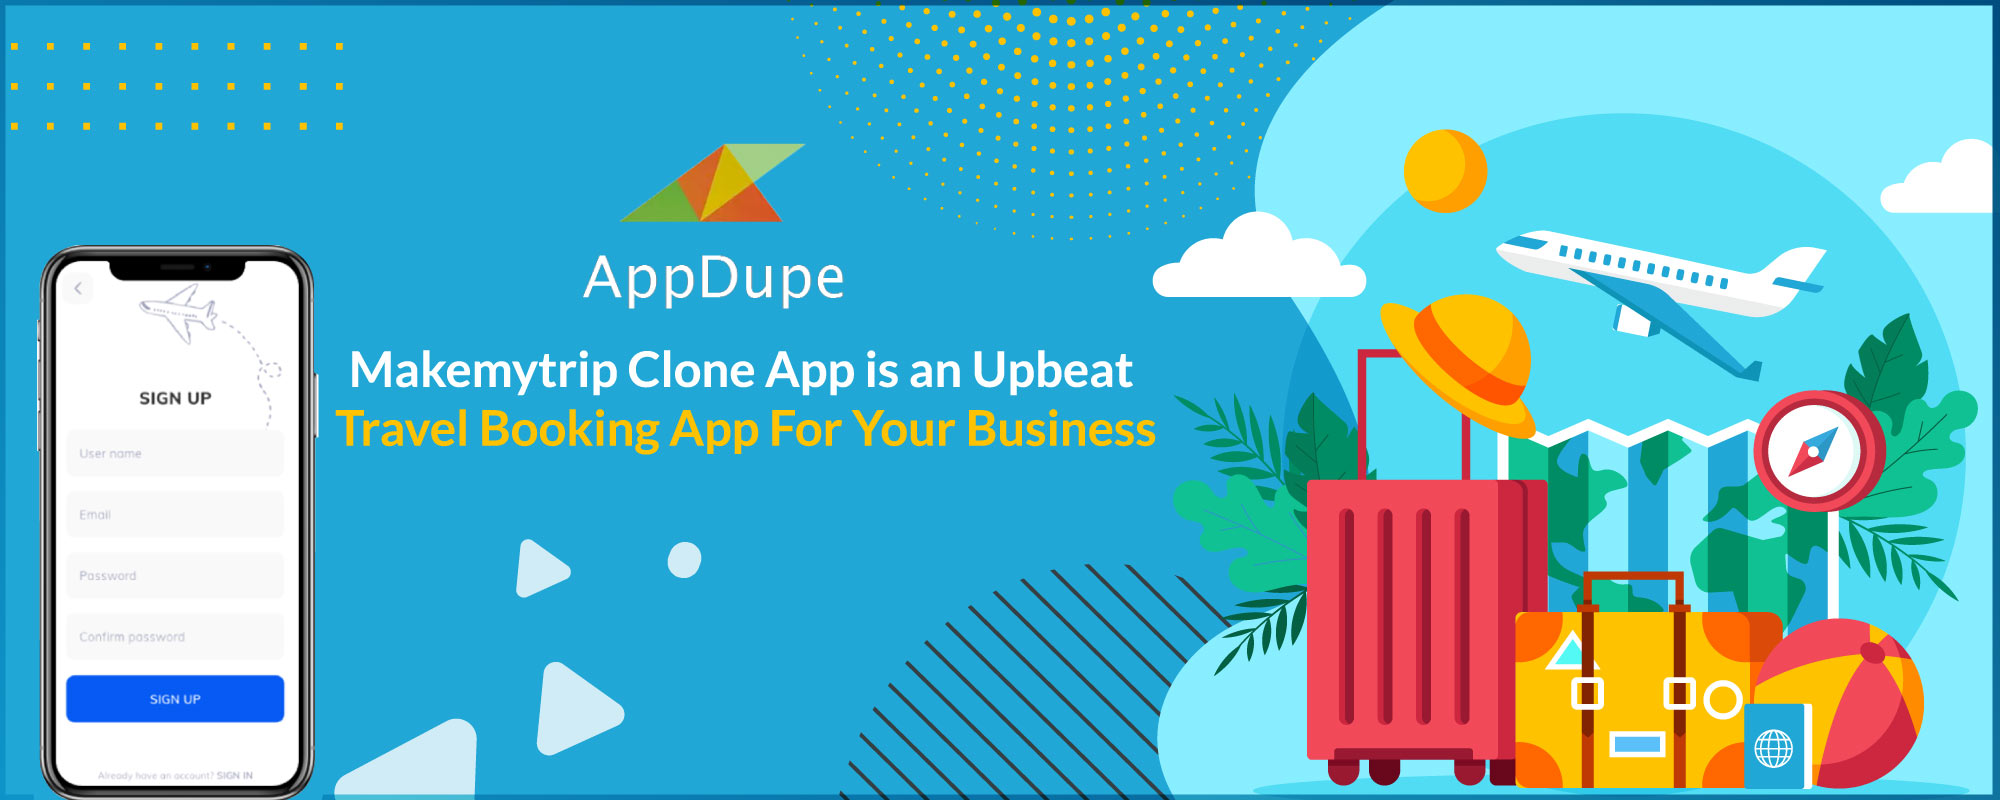 Makemytrip Clone App Is An Upbeat Travel Booking App For Your Business - Blog | Appdupe